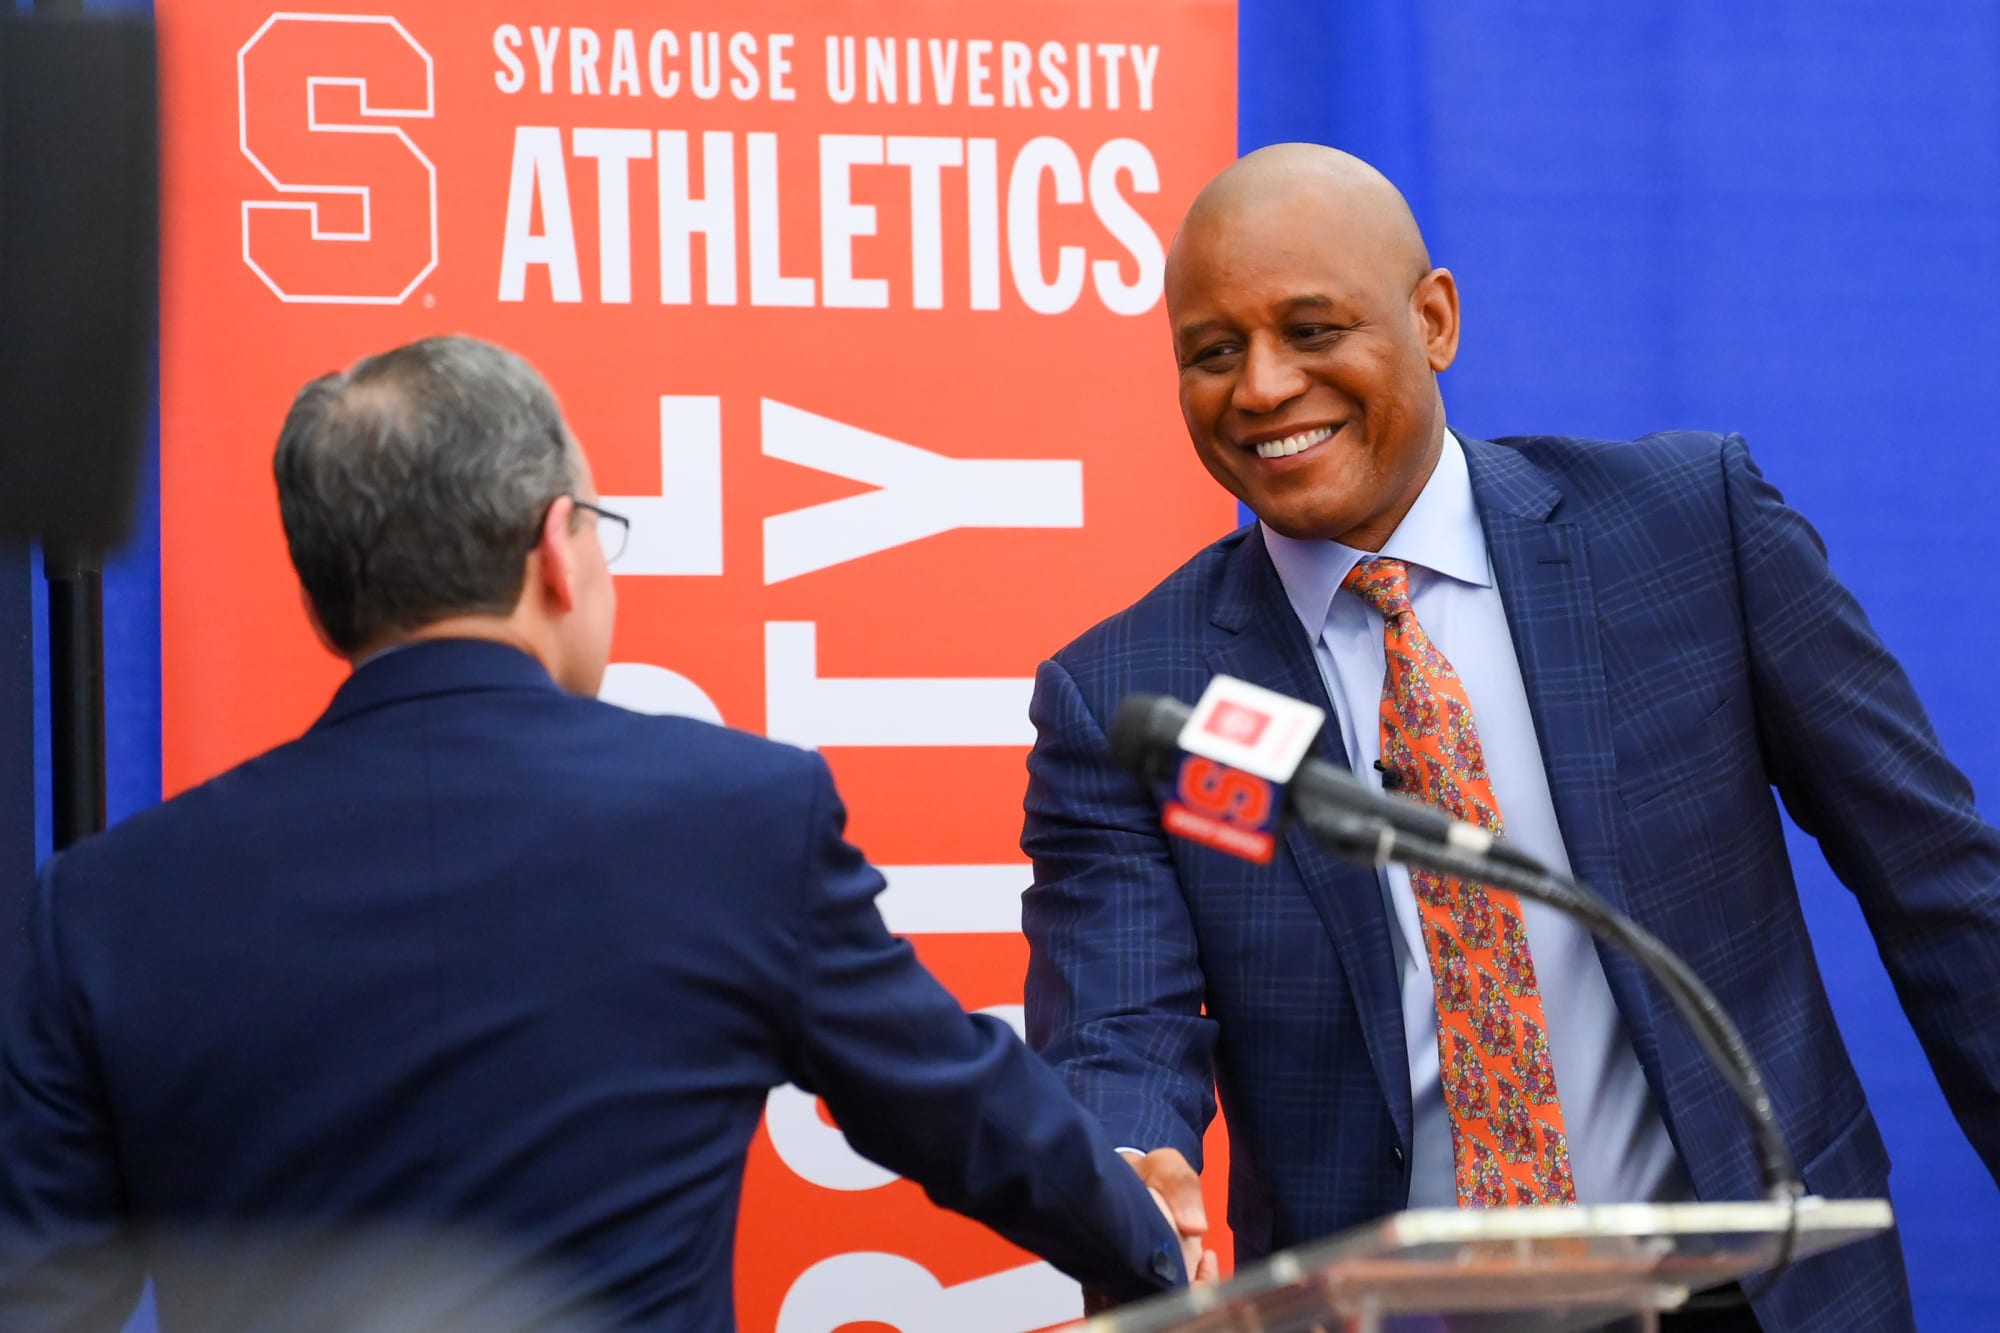 Syracuse Basketball: Many reasons to feel excitement for Adrian Autry era